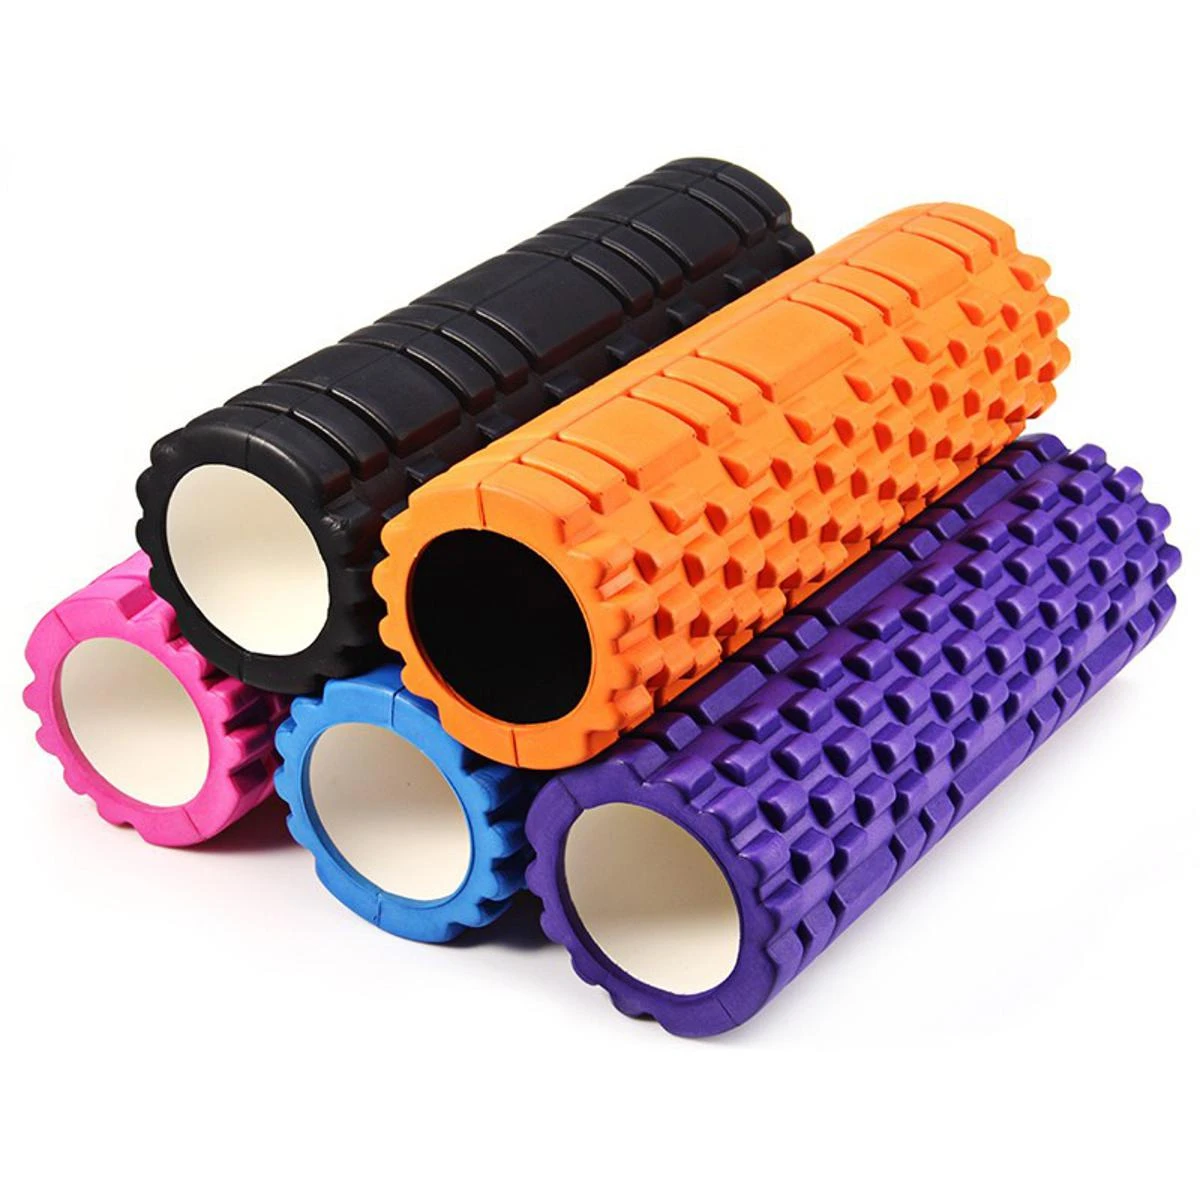 Fitness High Density Foam Roller Exercise Back Muscle Pilates Yoga Training Massage Physiotherapy